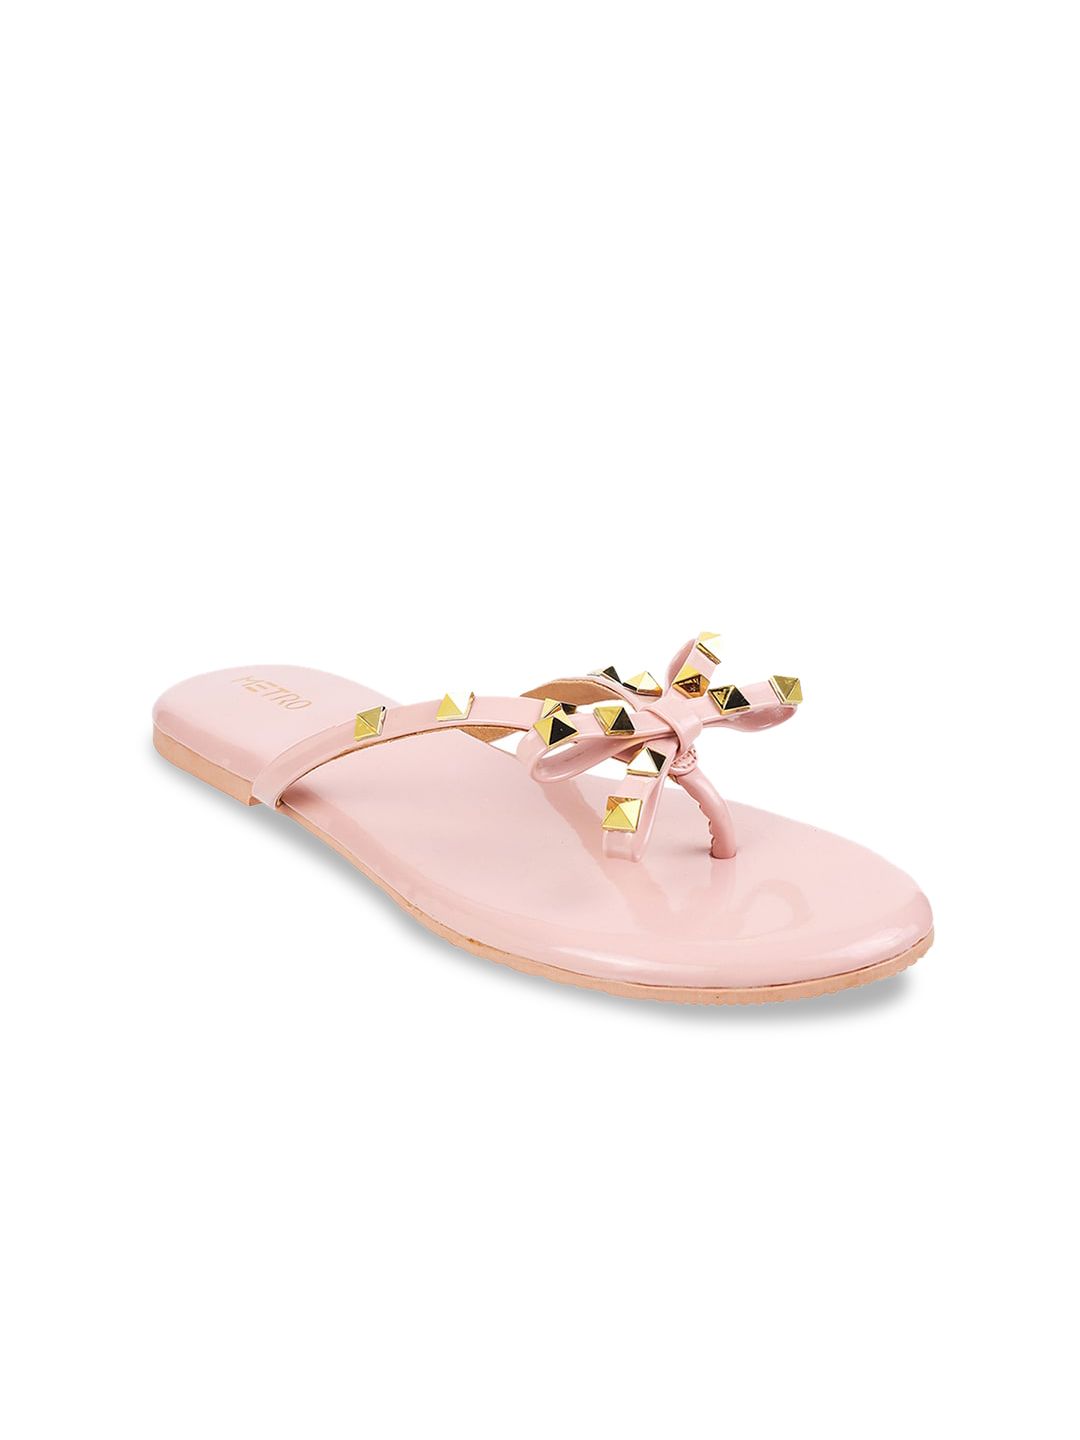 Metro Women Peach-Coloured Embellished T-Strap Flats Price in India